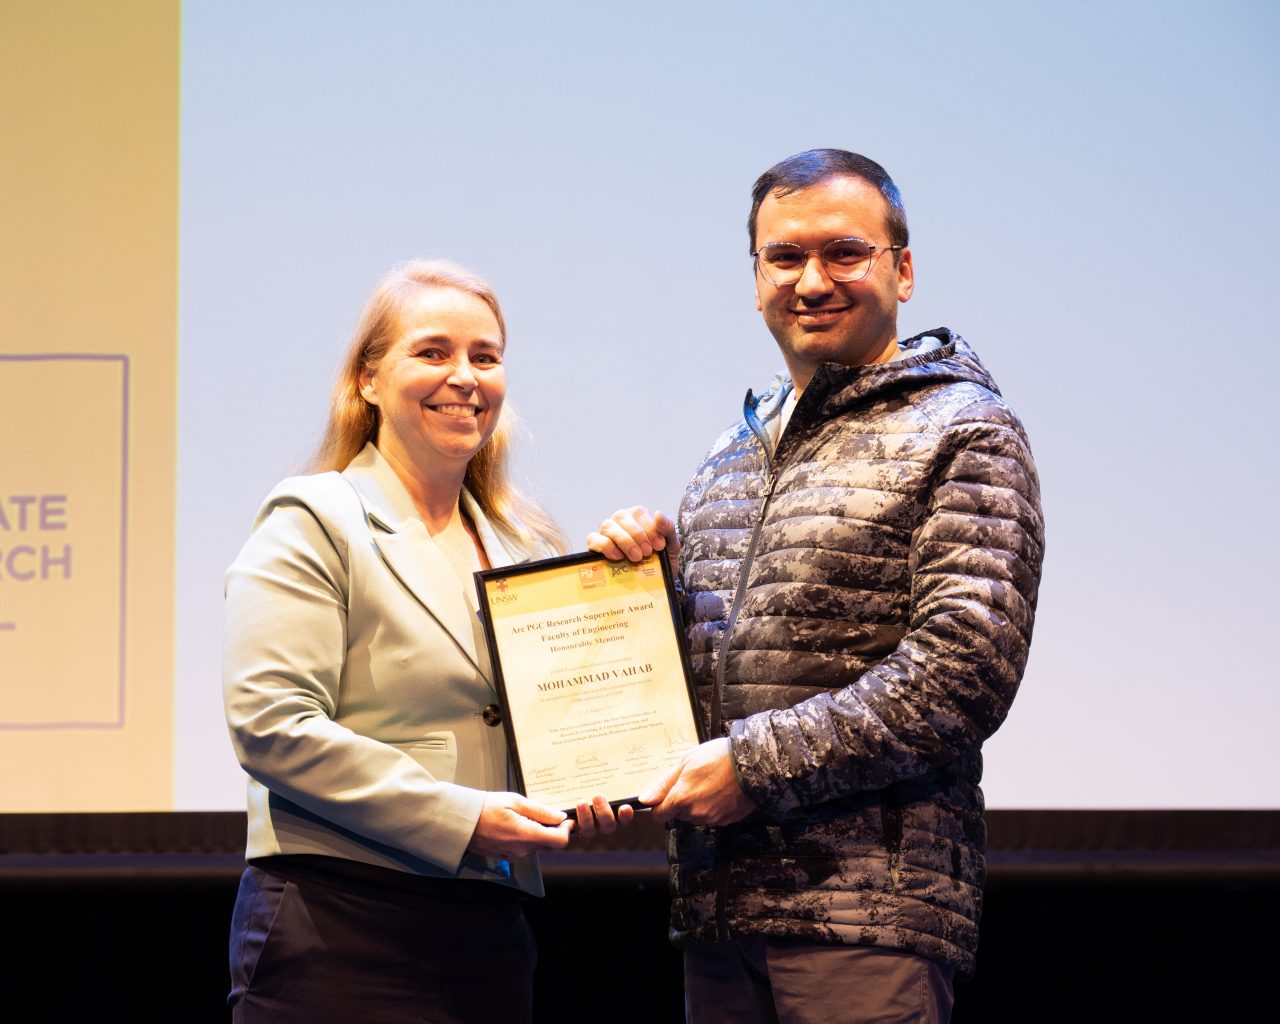 Penny Martens and Mohammad award scientia